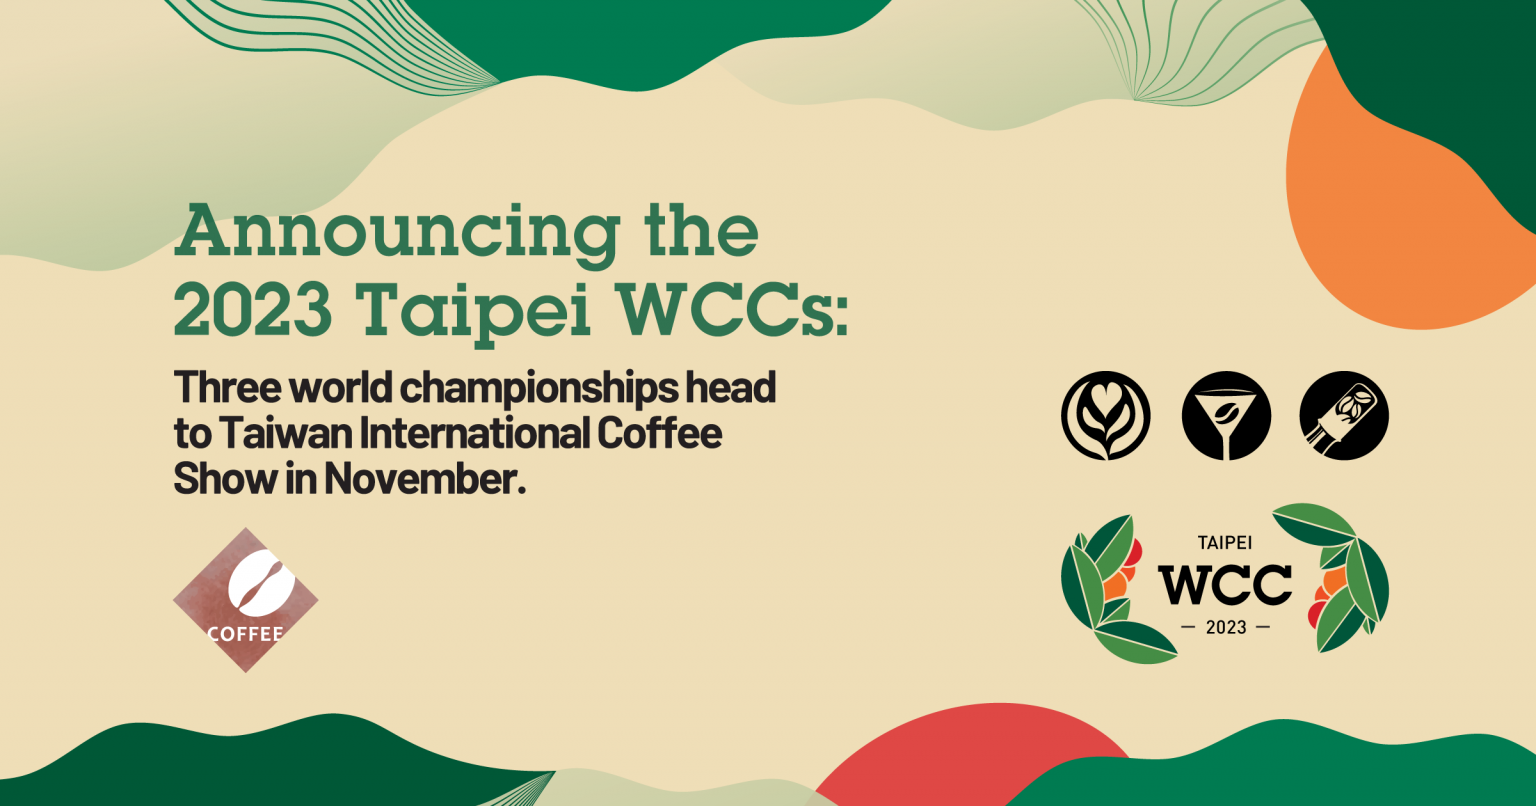 Announcing the 2023 Taipei World Coffee Championships — World Coffee Events